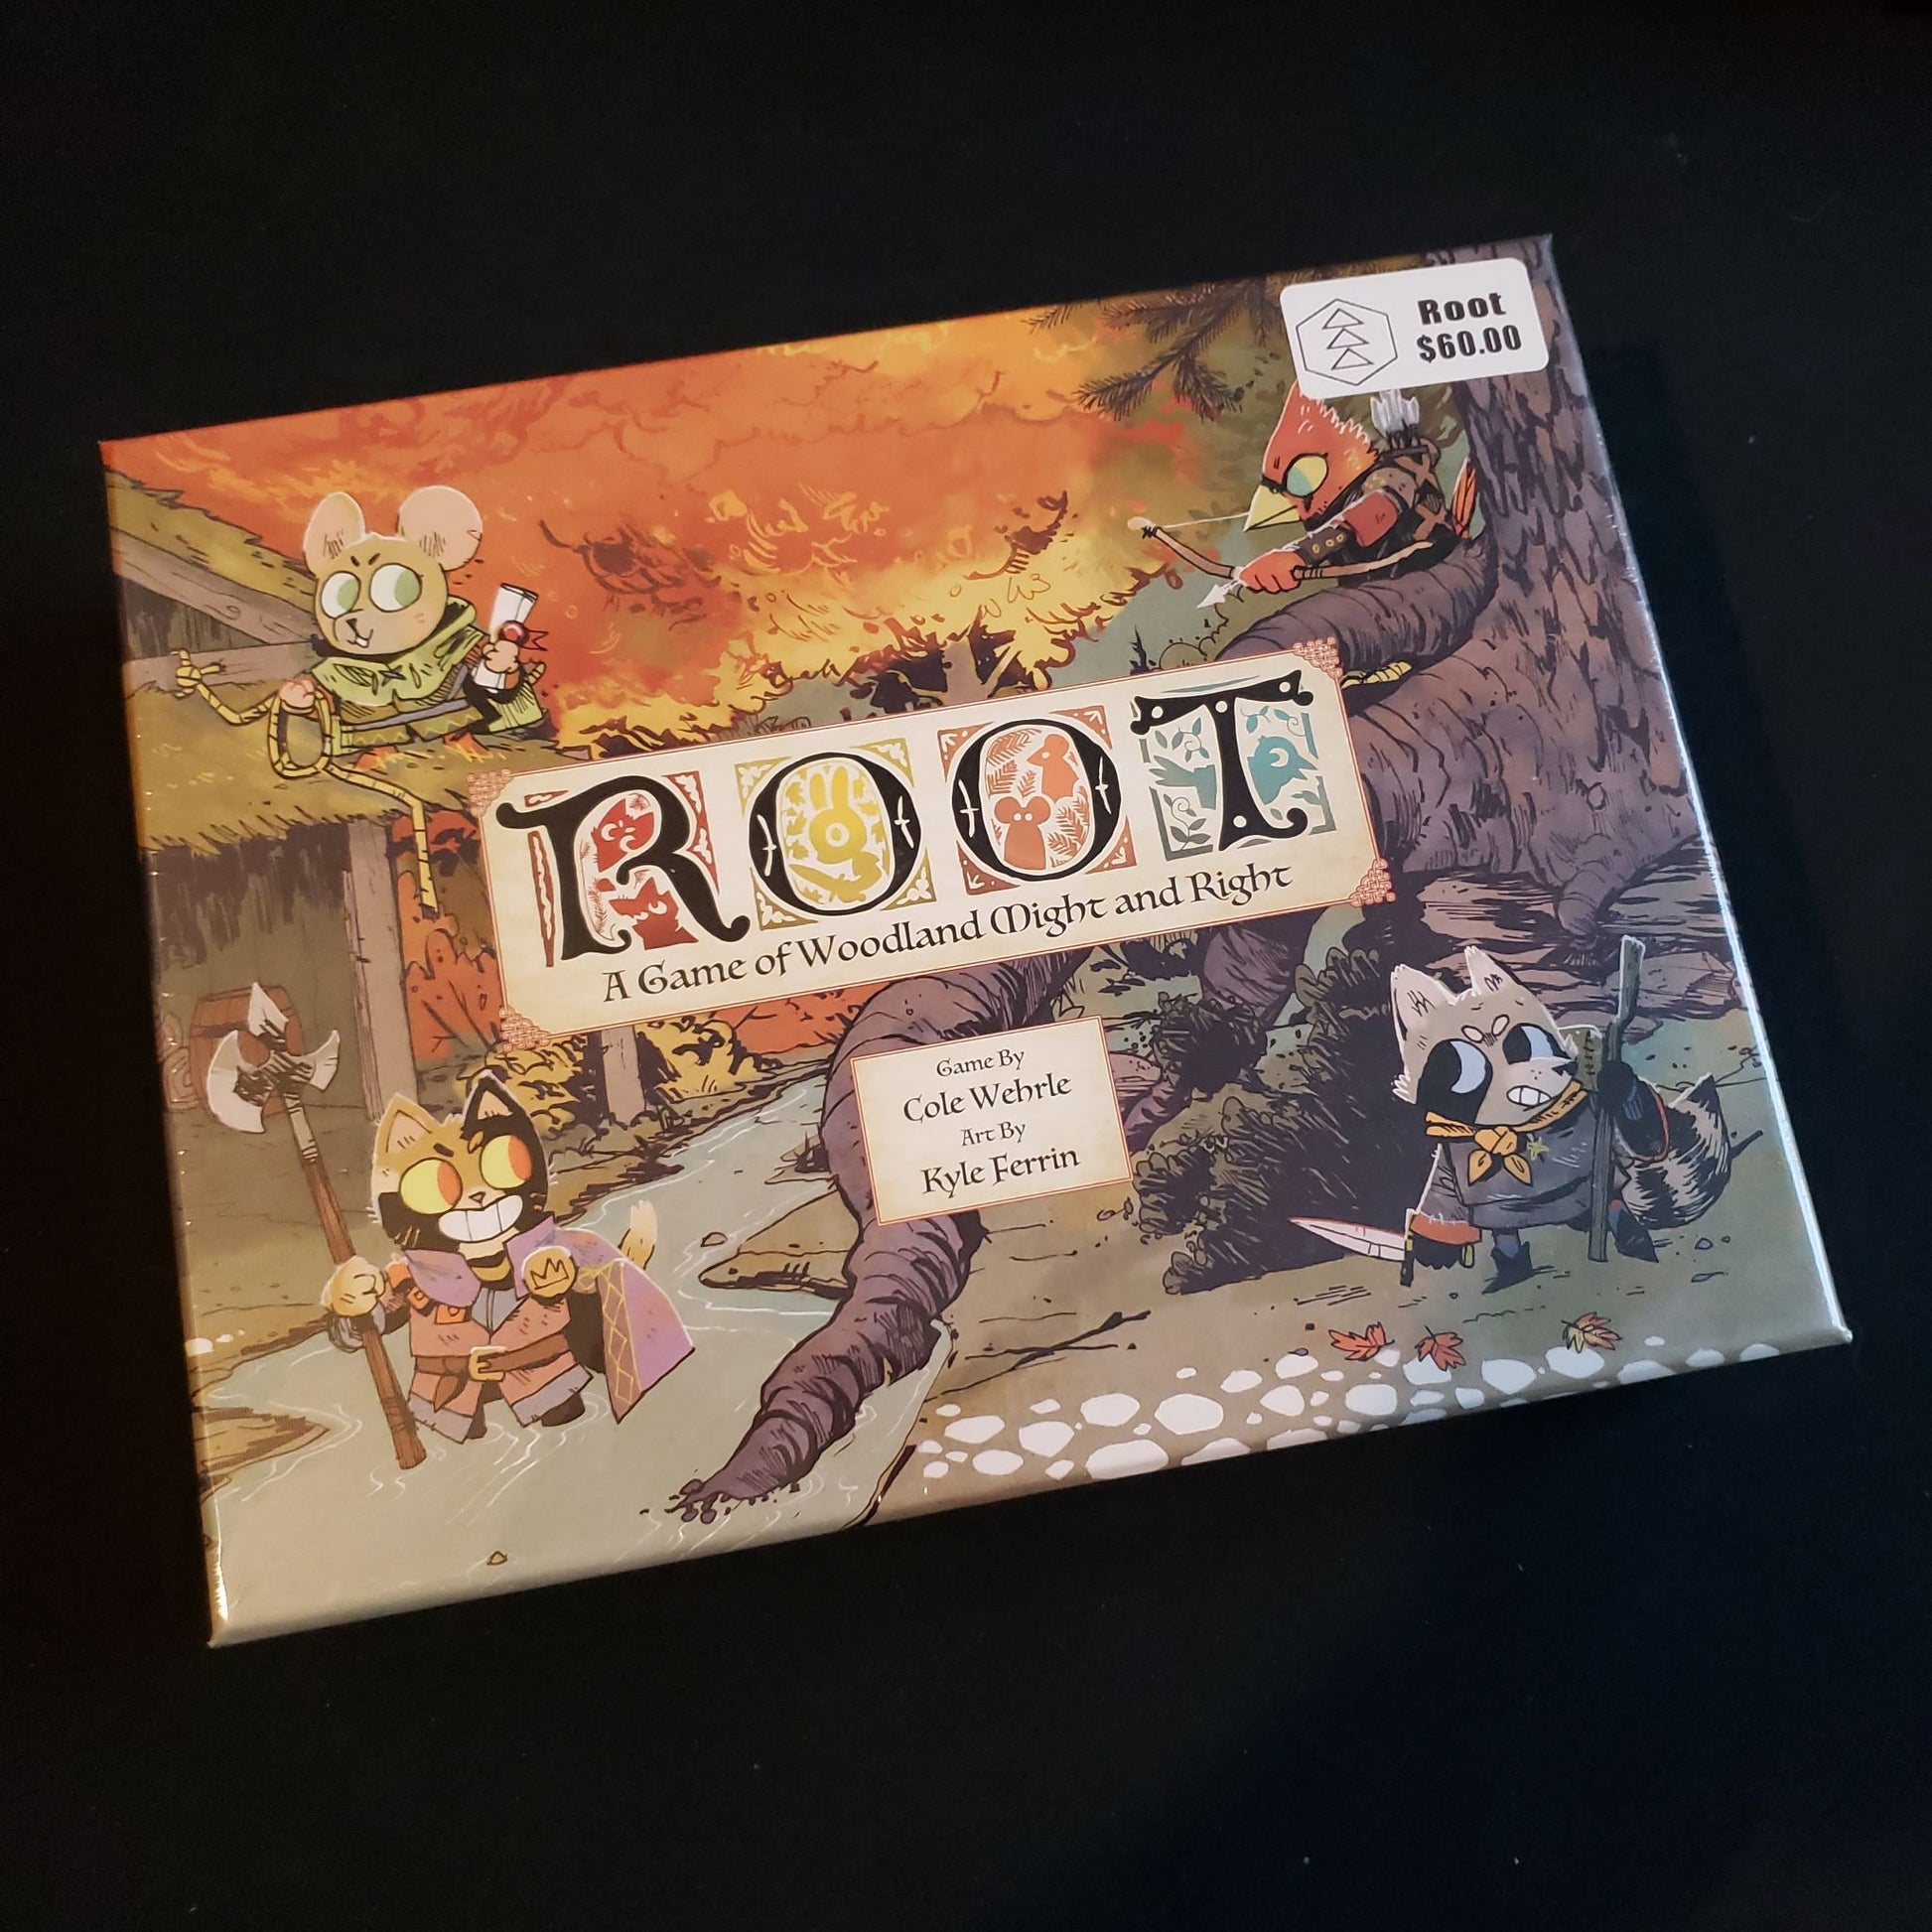 Image shows the front cover of the box of the Root board game